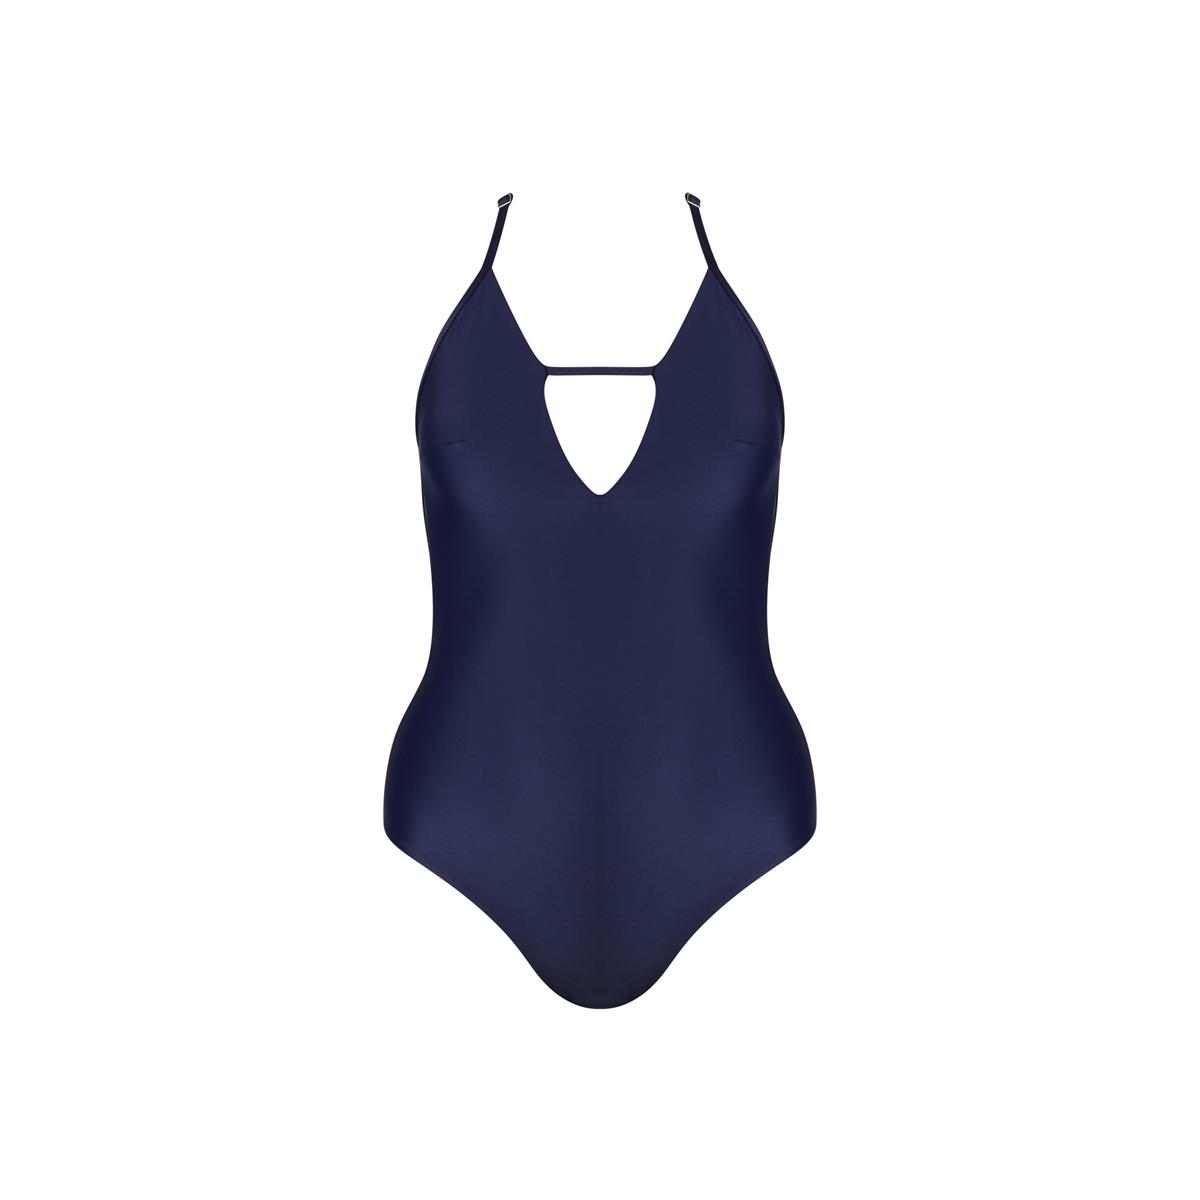 MARGARET AND HERMIONE_SS18_Swimsuit No.2_night_EUR 154,00